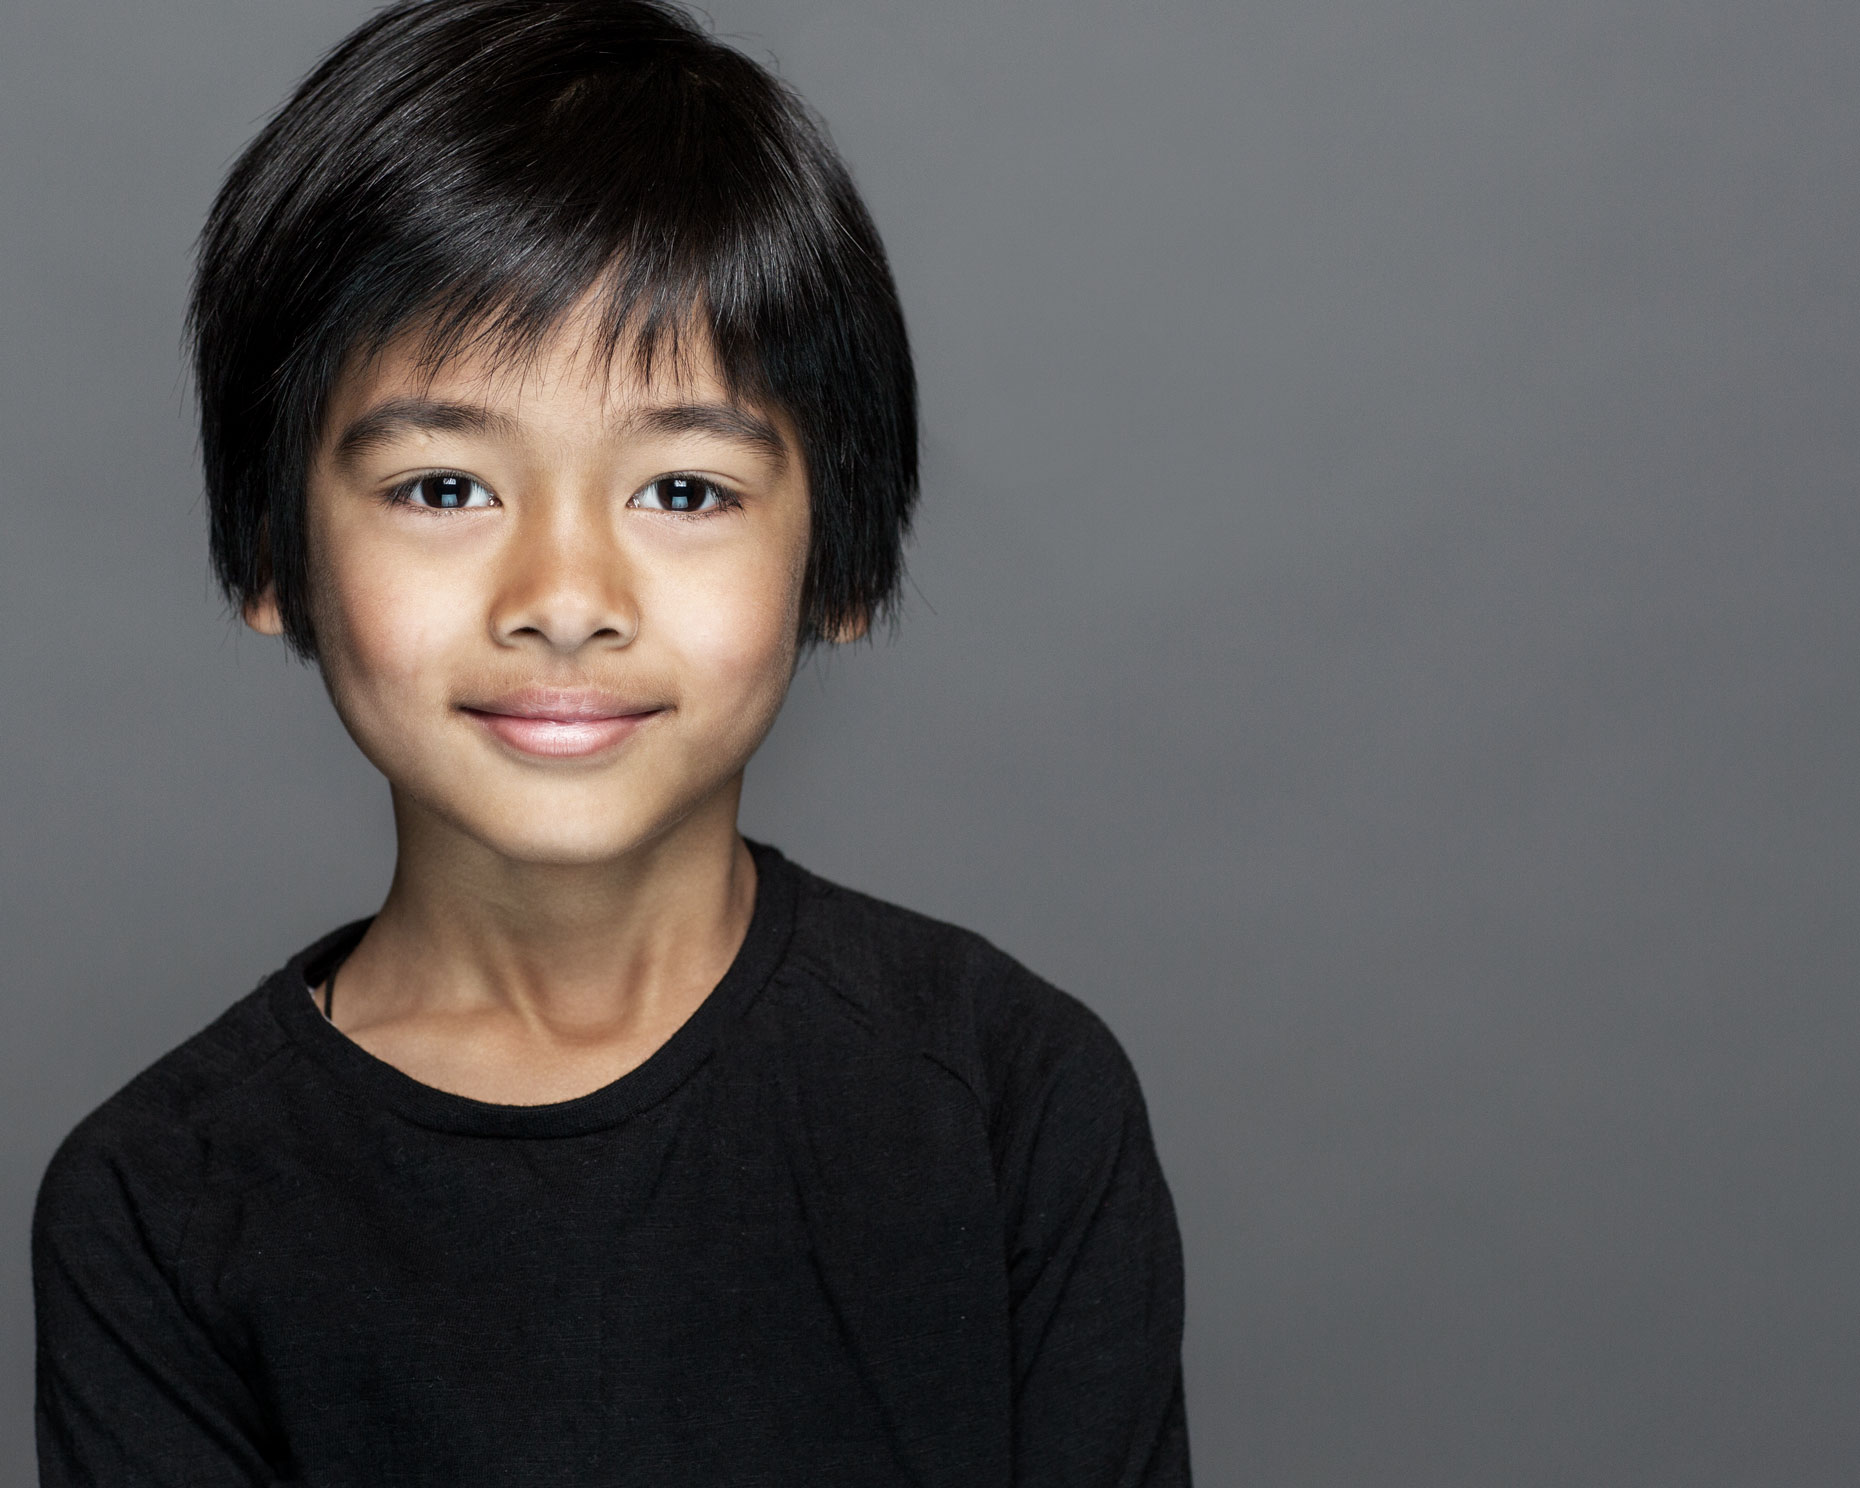 Headshot of child for Melbourne Museum by James Braund 